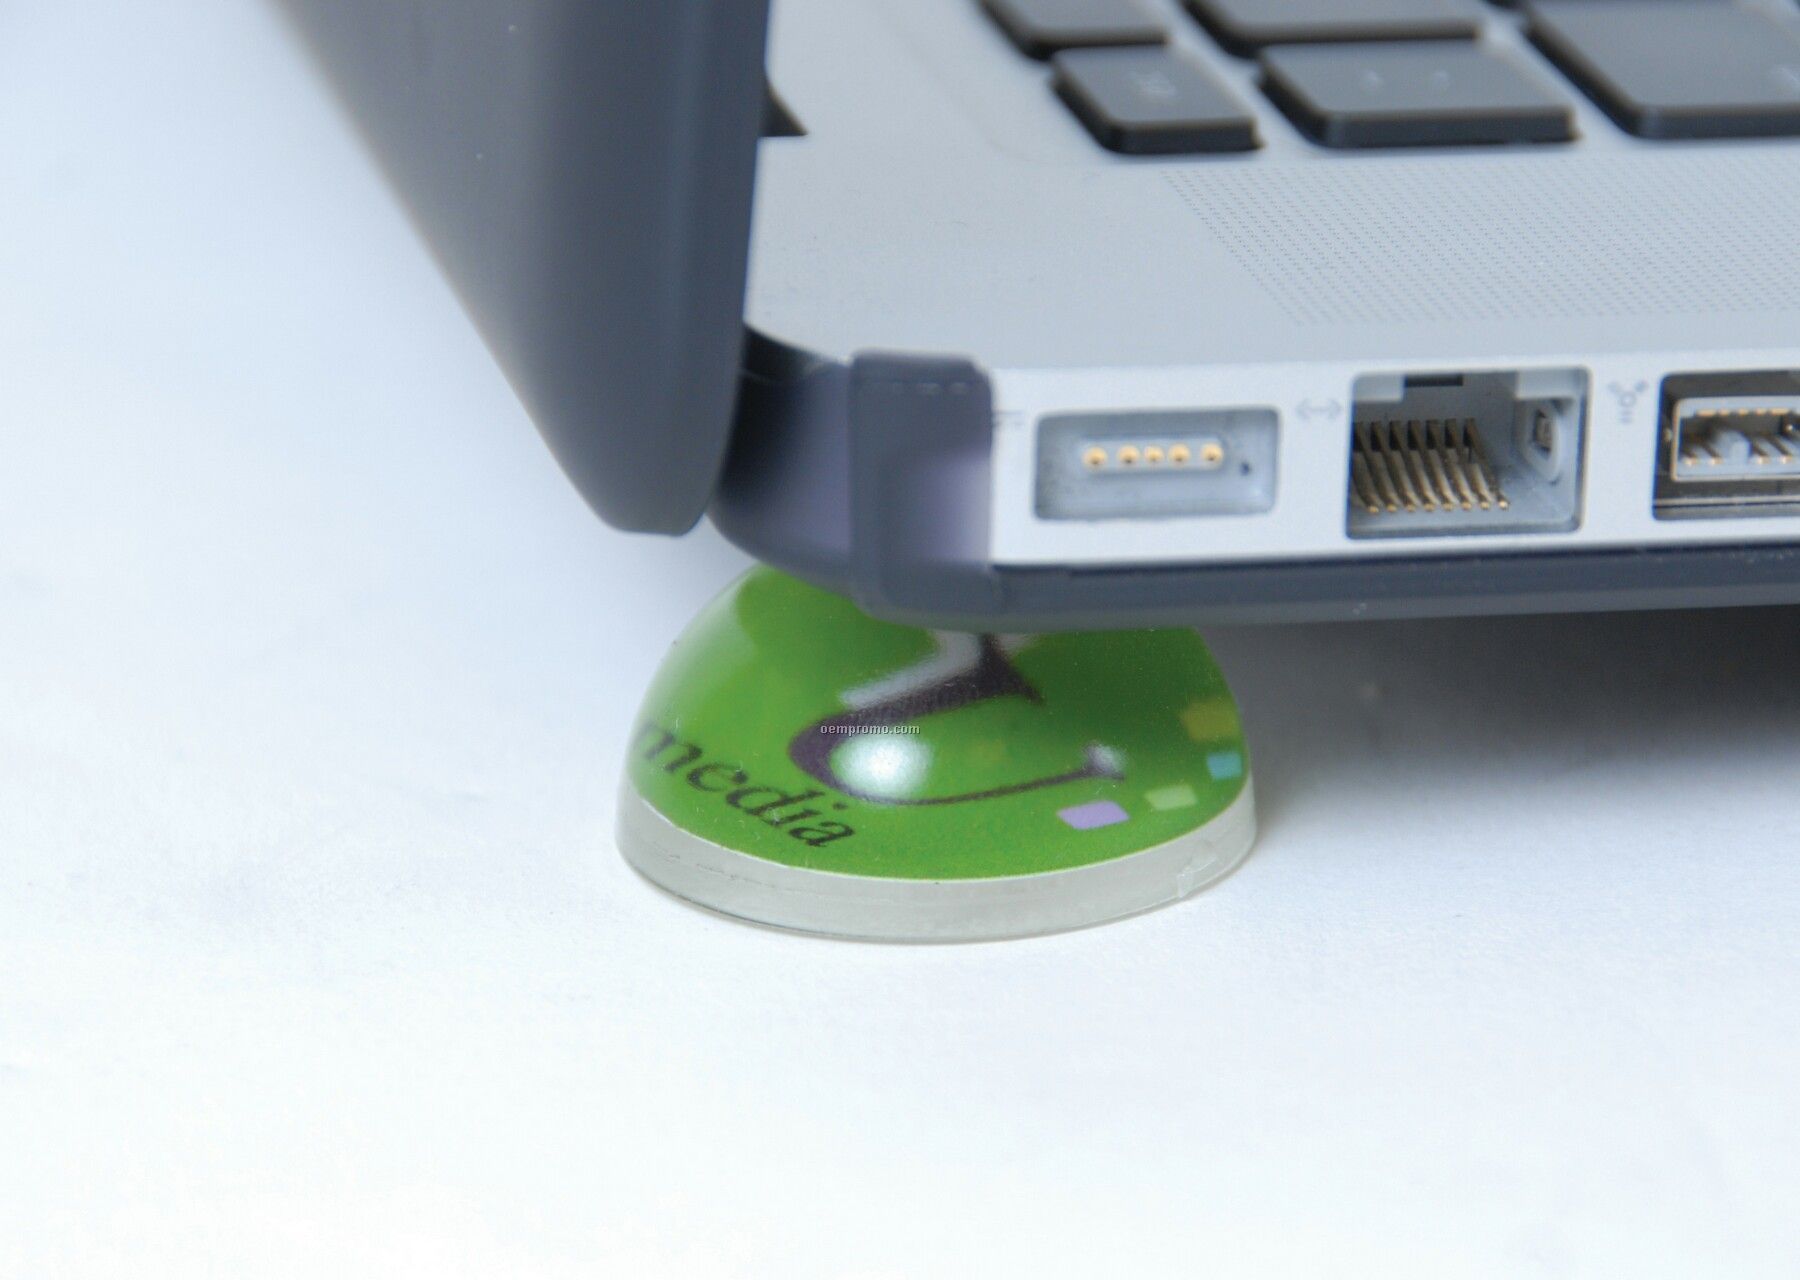 Laptop Heat Protectors ("Cool Mates" Protect Your Laptop From Overheating!)